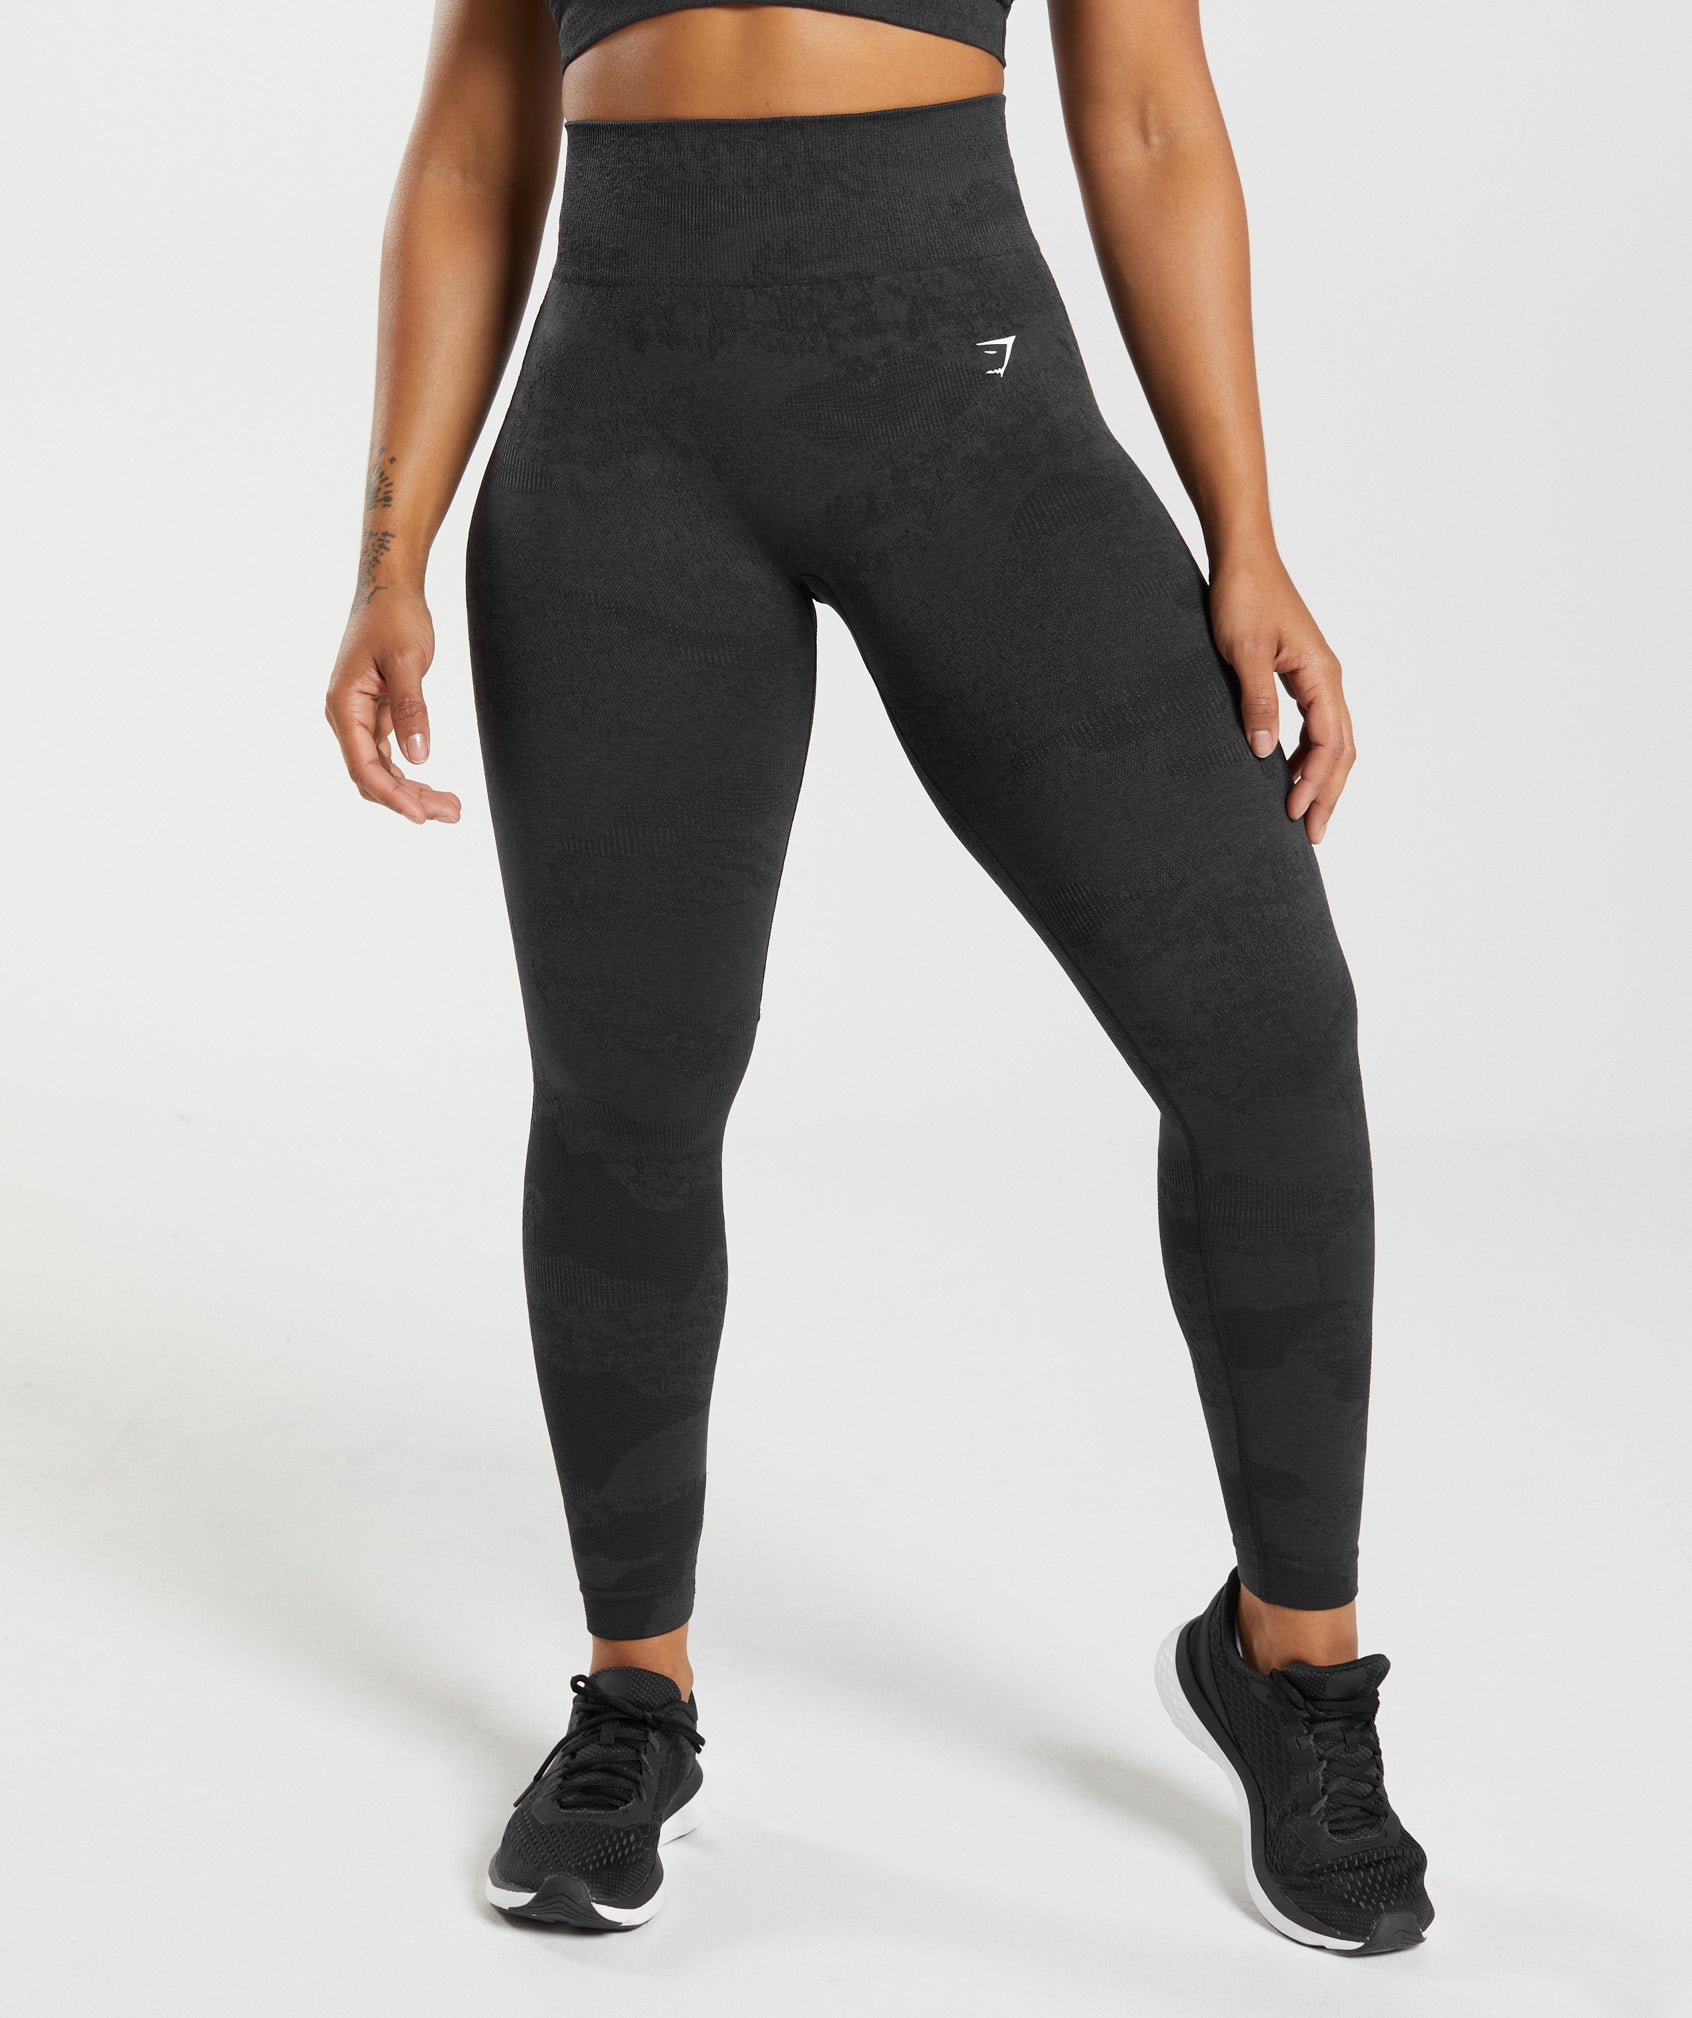 Brand new with tags Woman's GymShark Leggings size Medium, in Southampton,  Hampshire